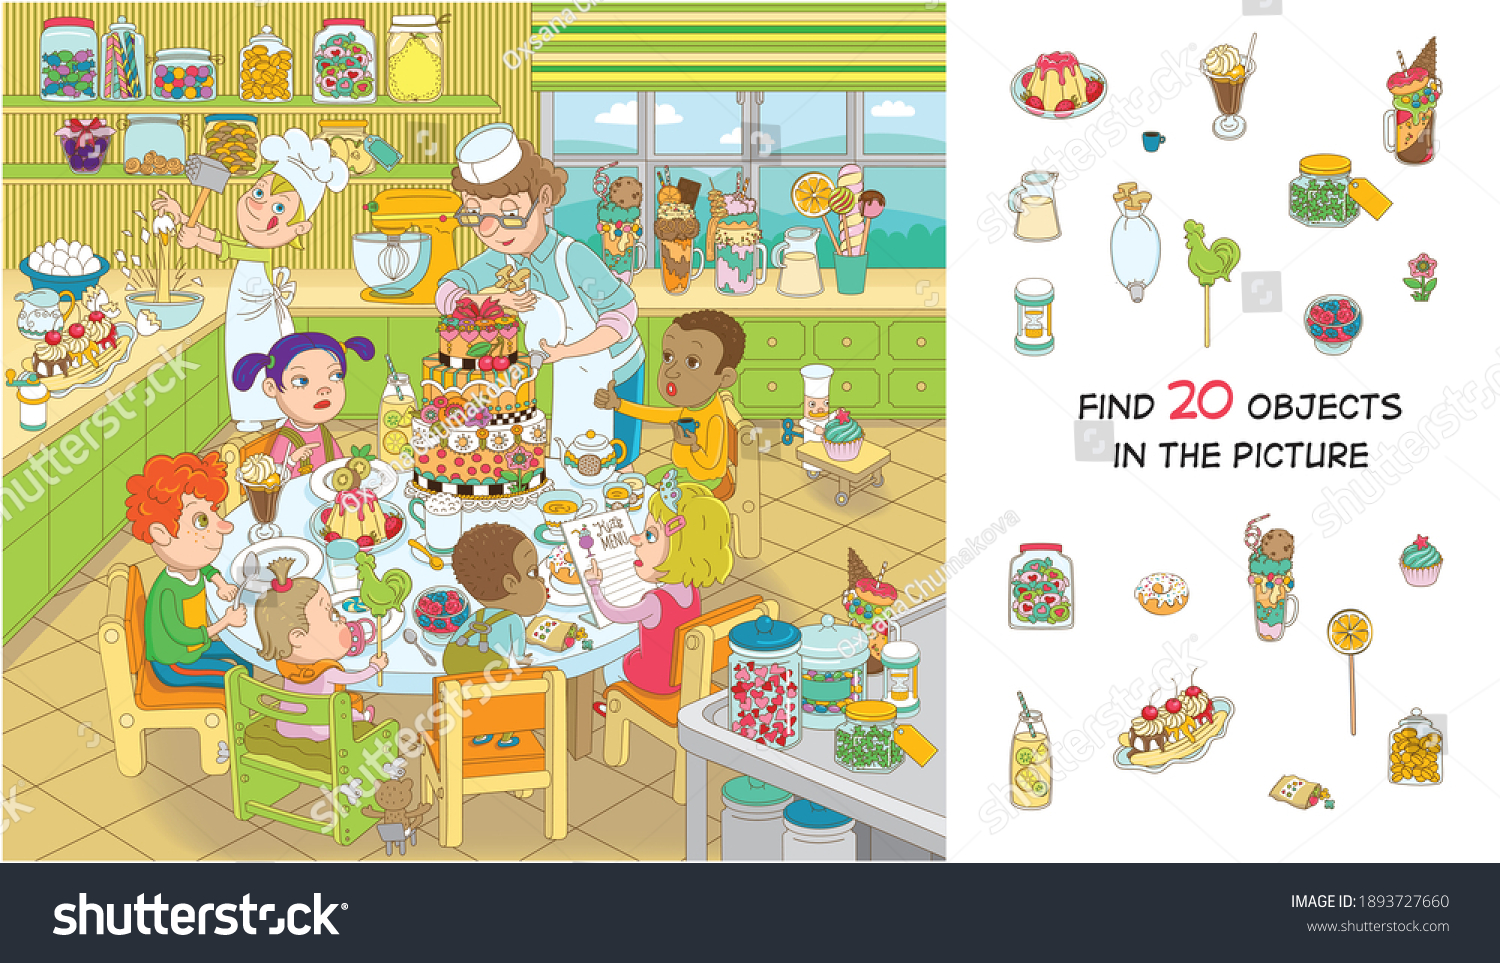 Find 20 objects in the picture. Hidden objects puzzle. Children of different nationalities are celebrating their birthday. Funny cartoon character. #1893727660